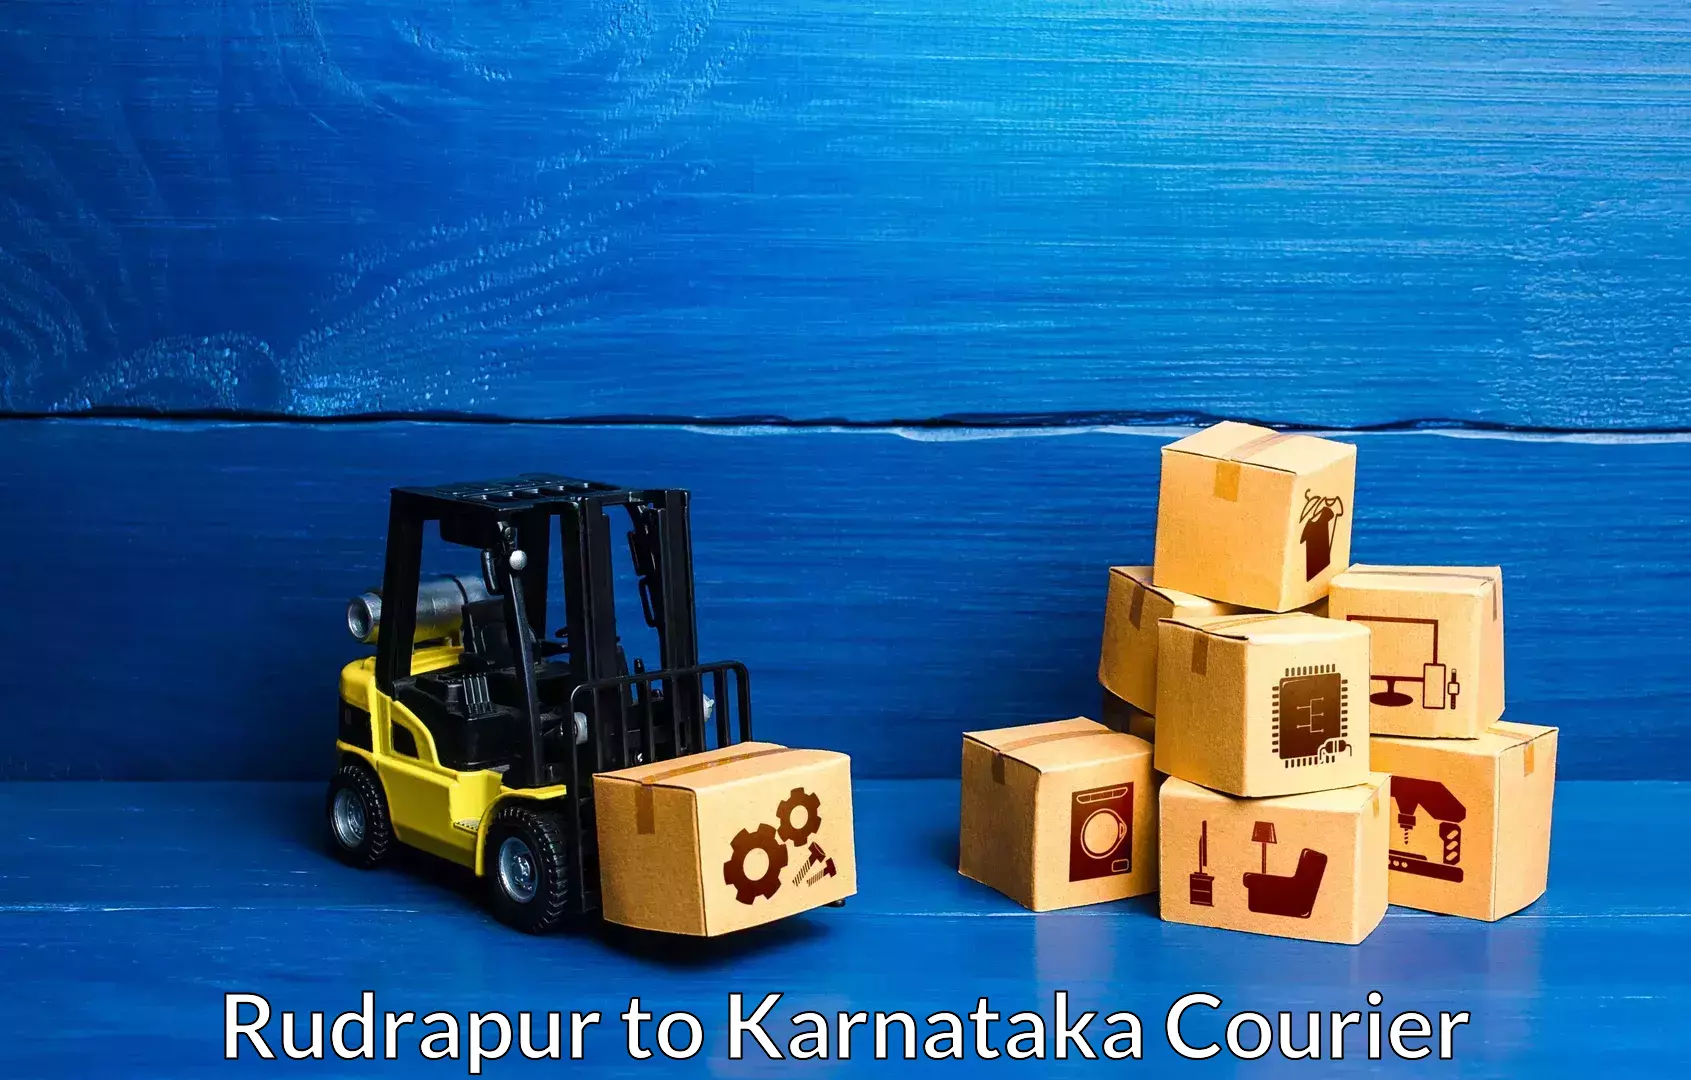 Furniture delivery service Rudrapur to Nelamangala